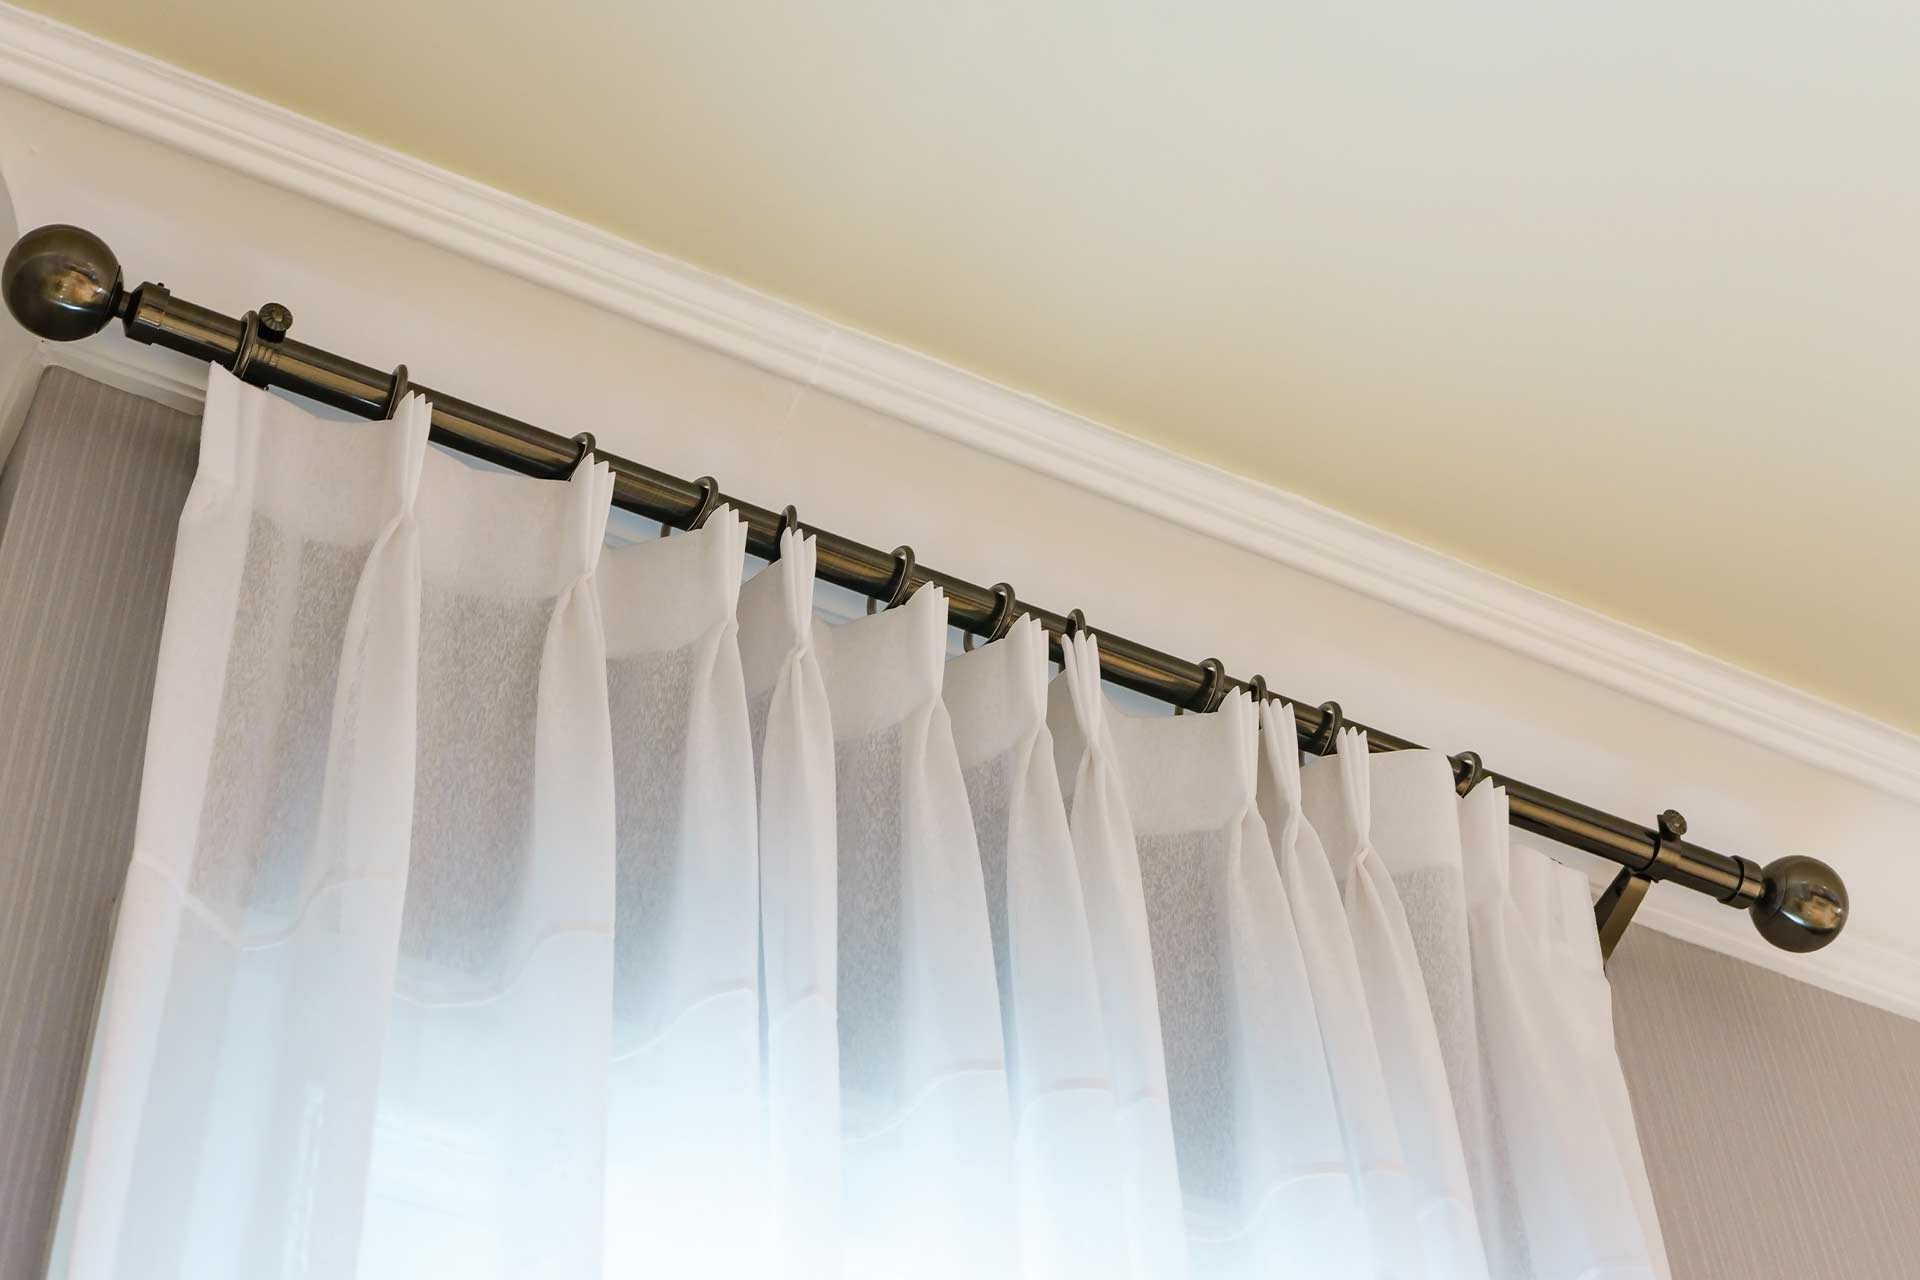 What are the 2 different ways you can hang curtains?